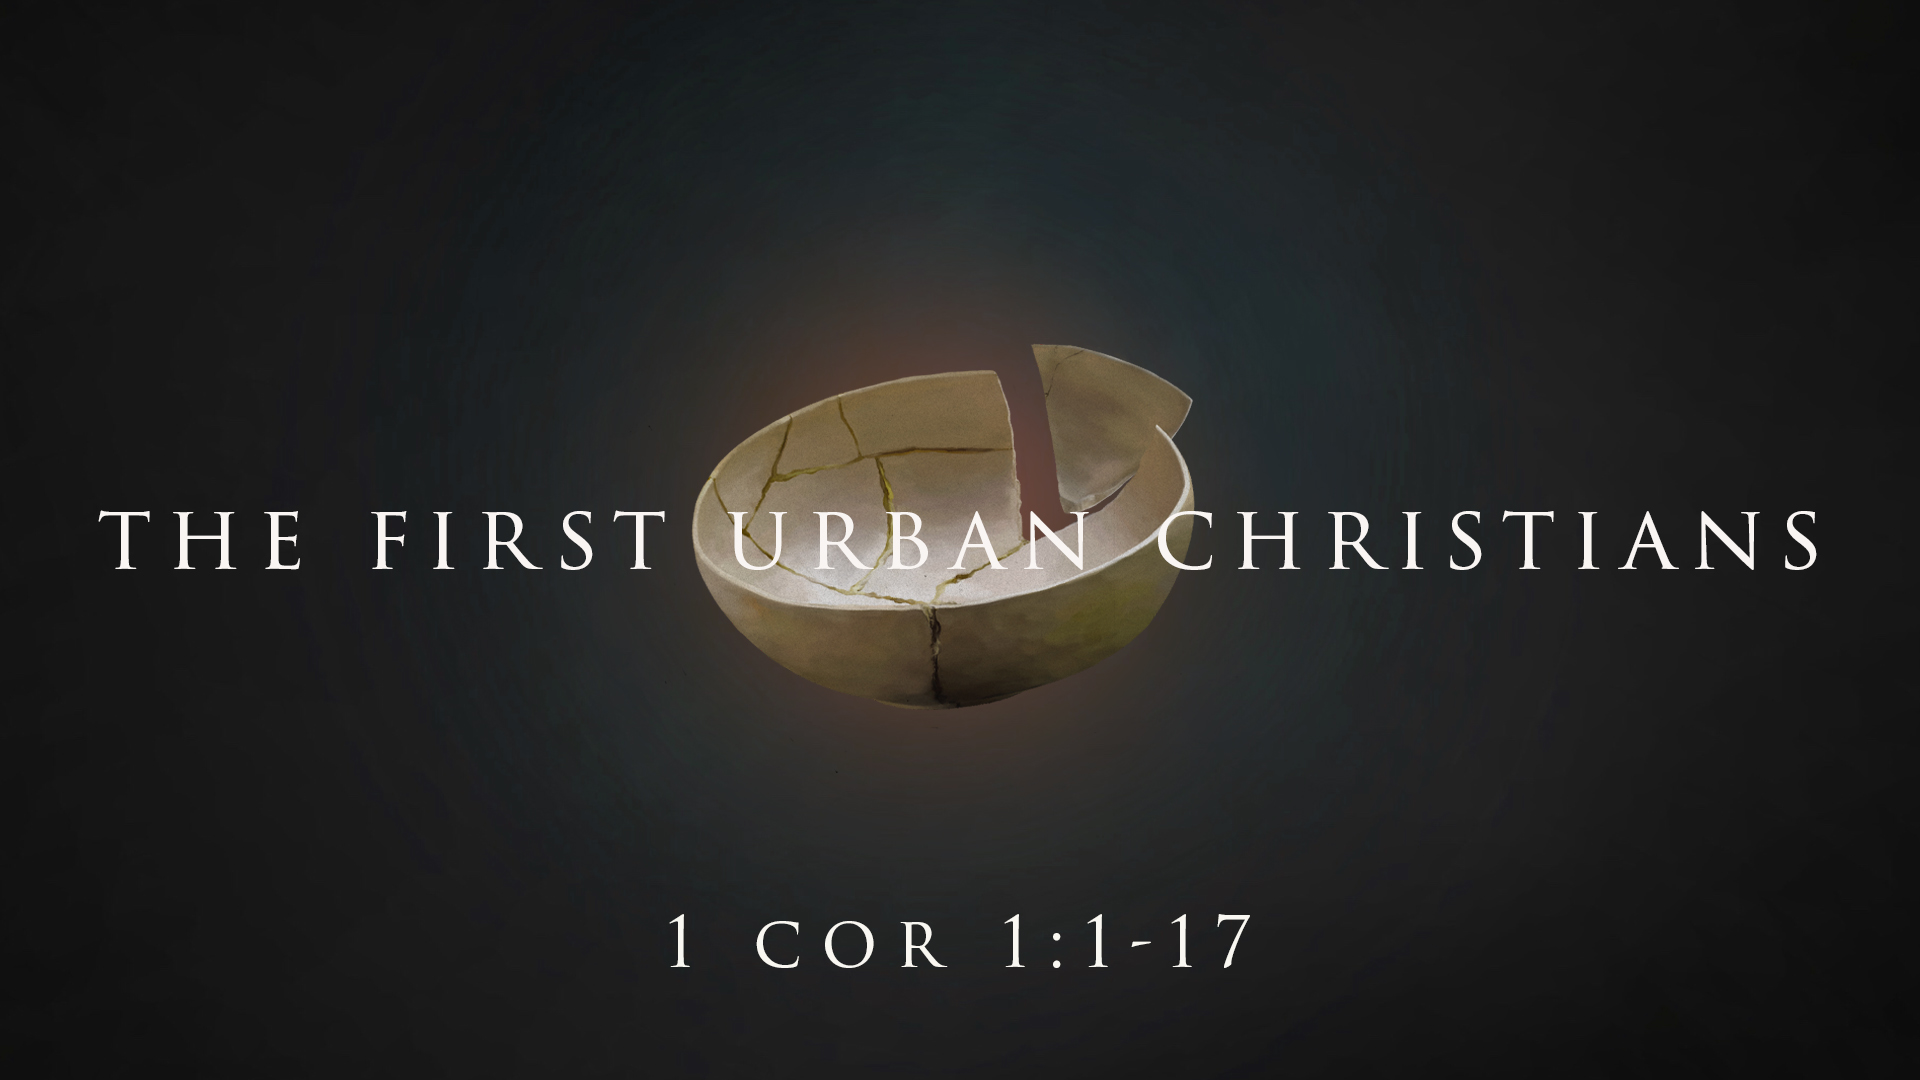 The First Urban Christians